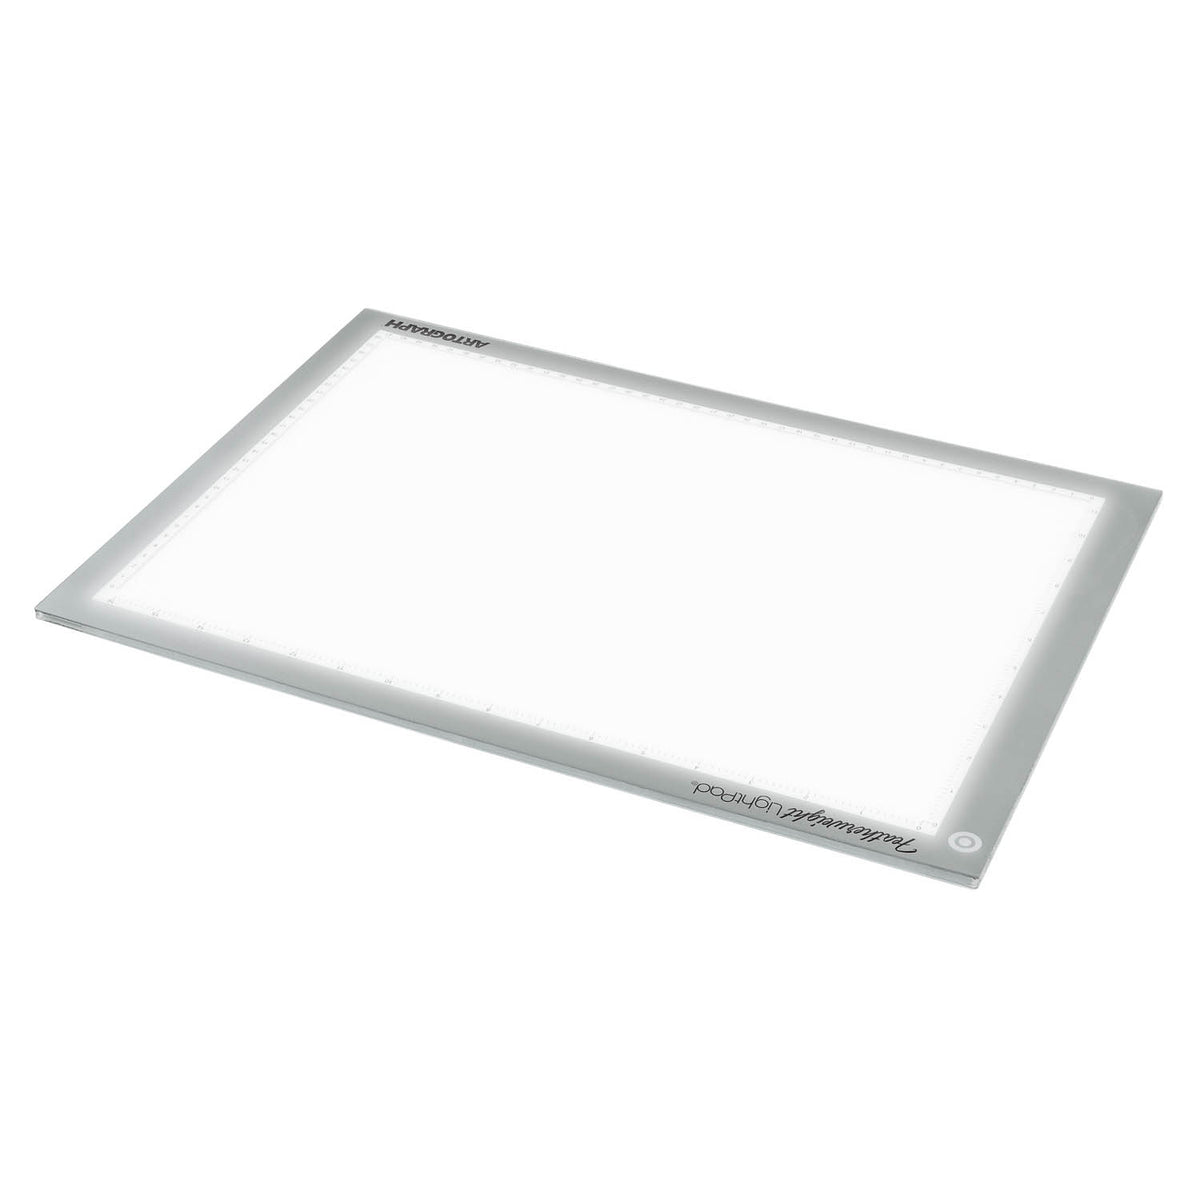 Featherweight 12 x 17 Ultra-Thin, Dimmable Lightpad for Drawing